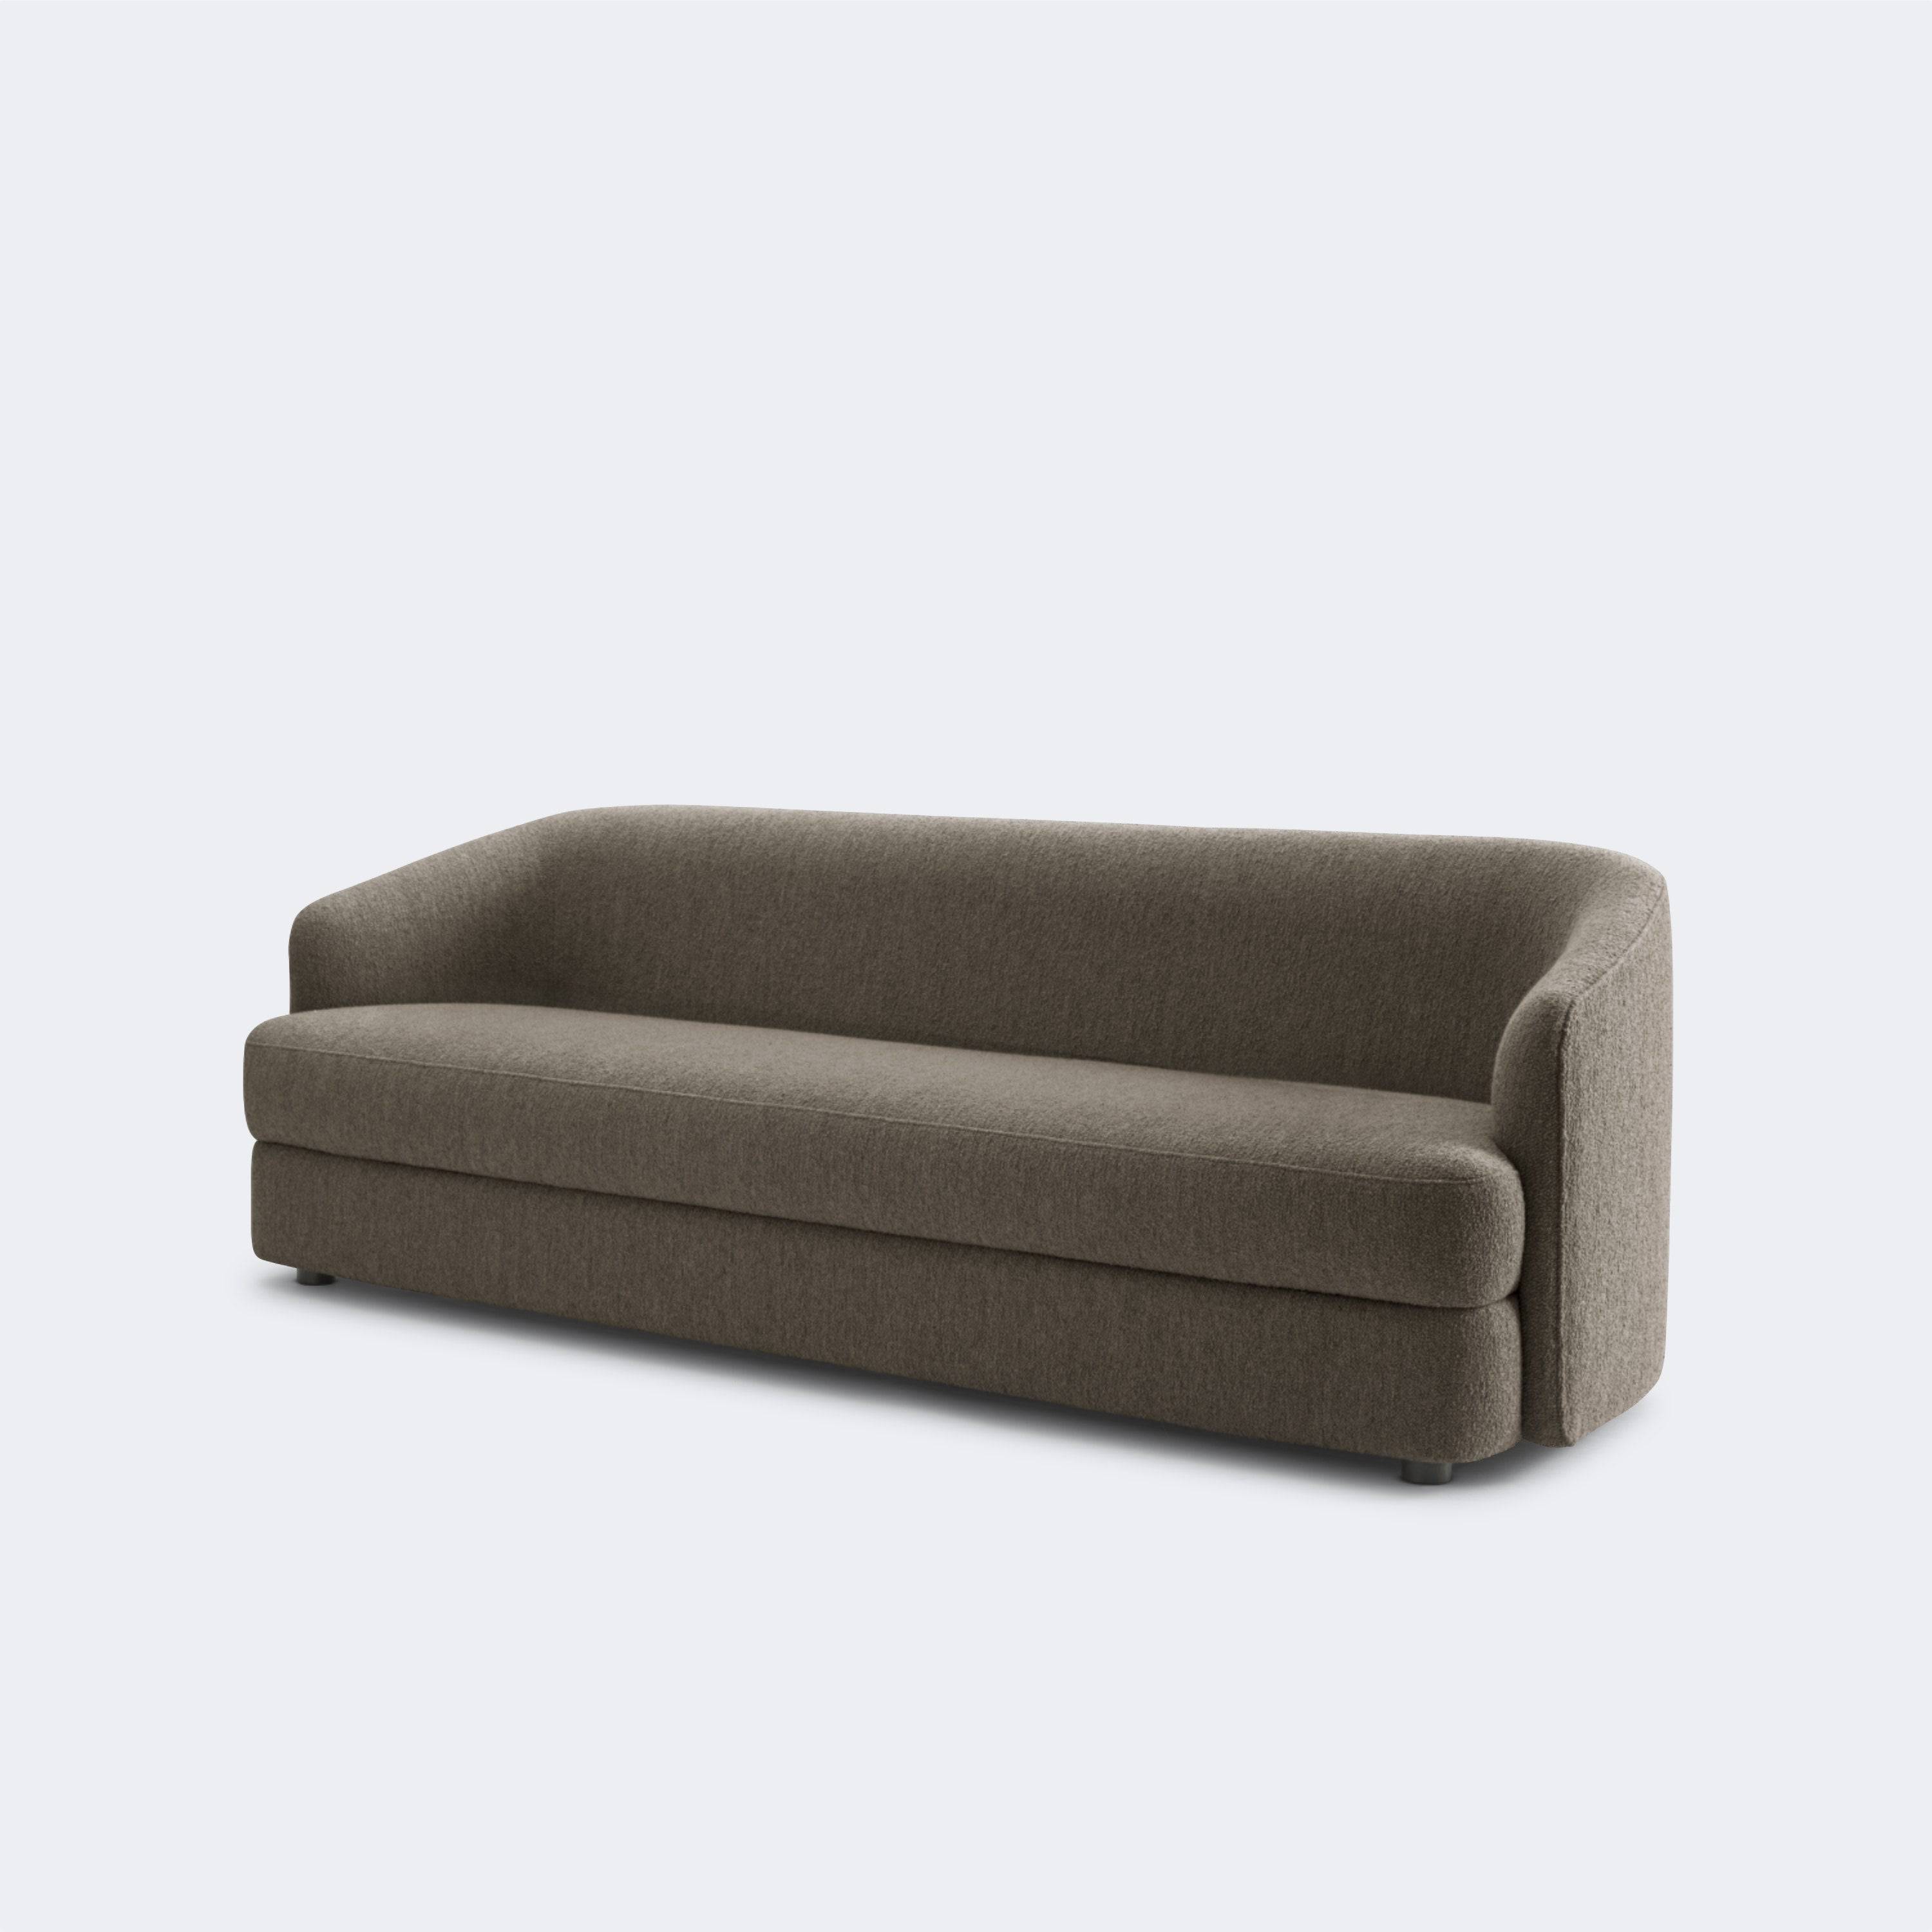 New Works Covent Sofa Deep, 3 Seater Ready To Ship Dark Taupe - KANSO#Upholstery_Dark Taupe